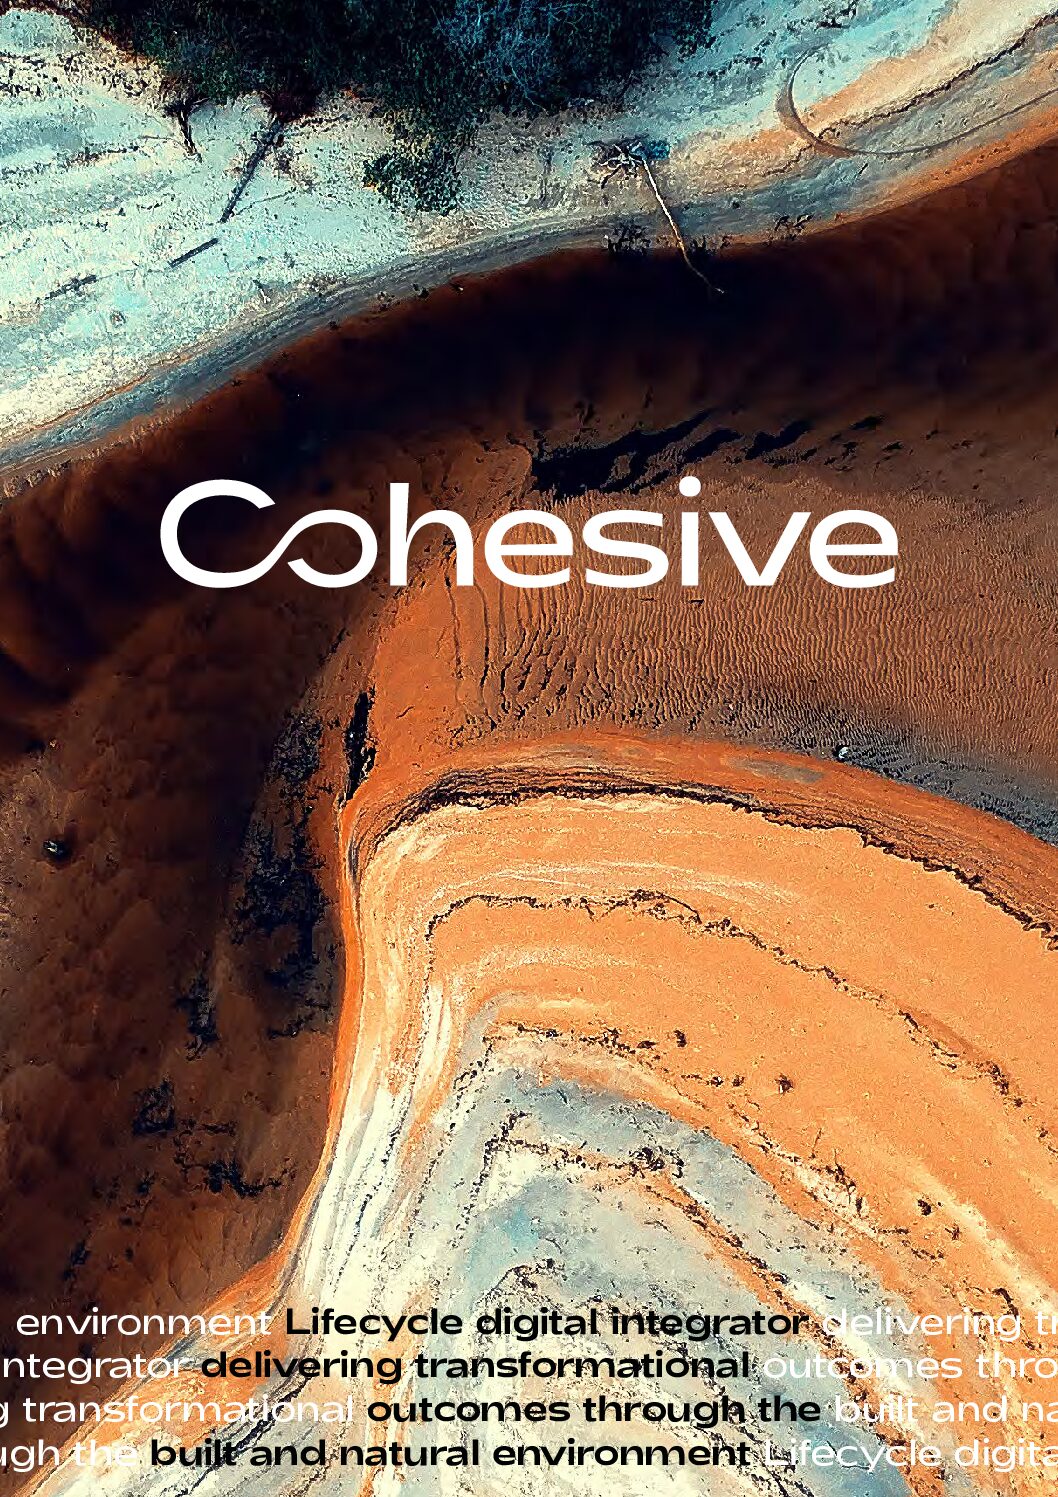 Cohesive Is a Lifecycle Digital Integrator